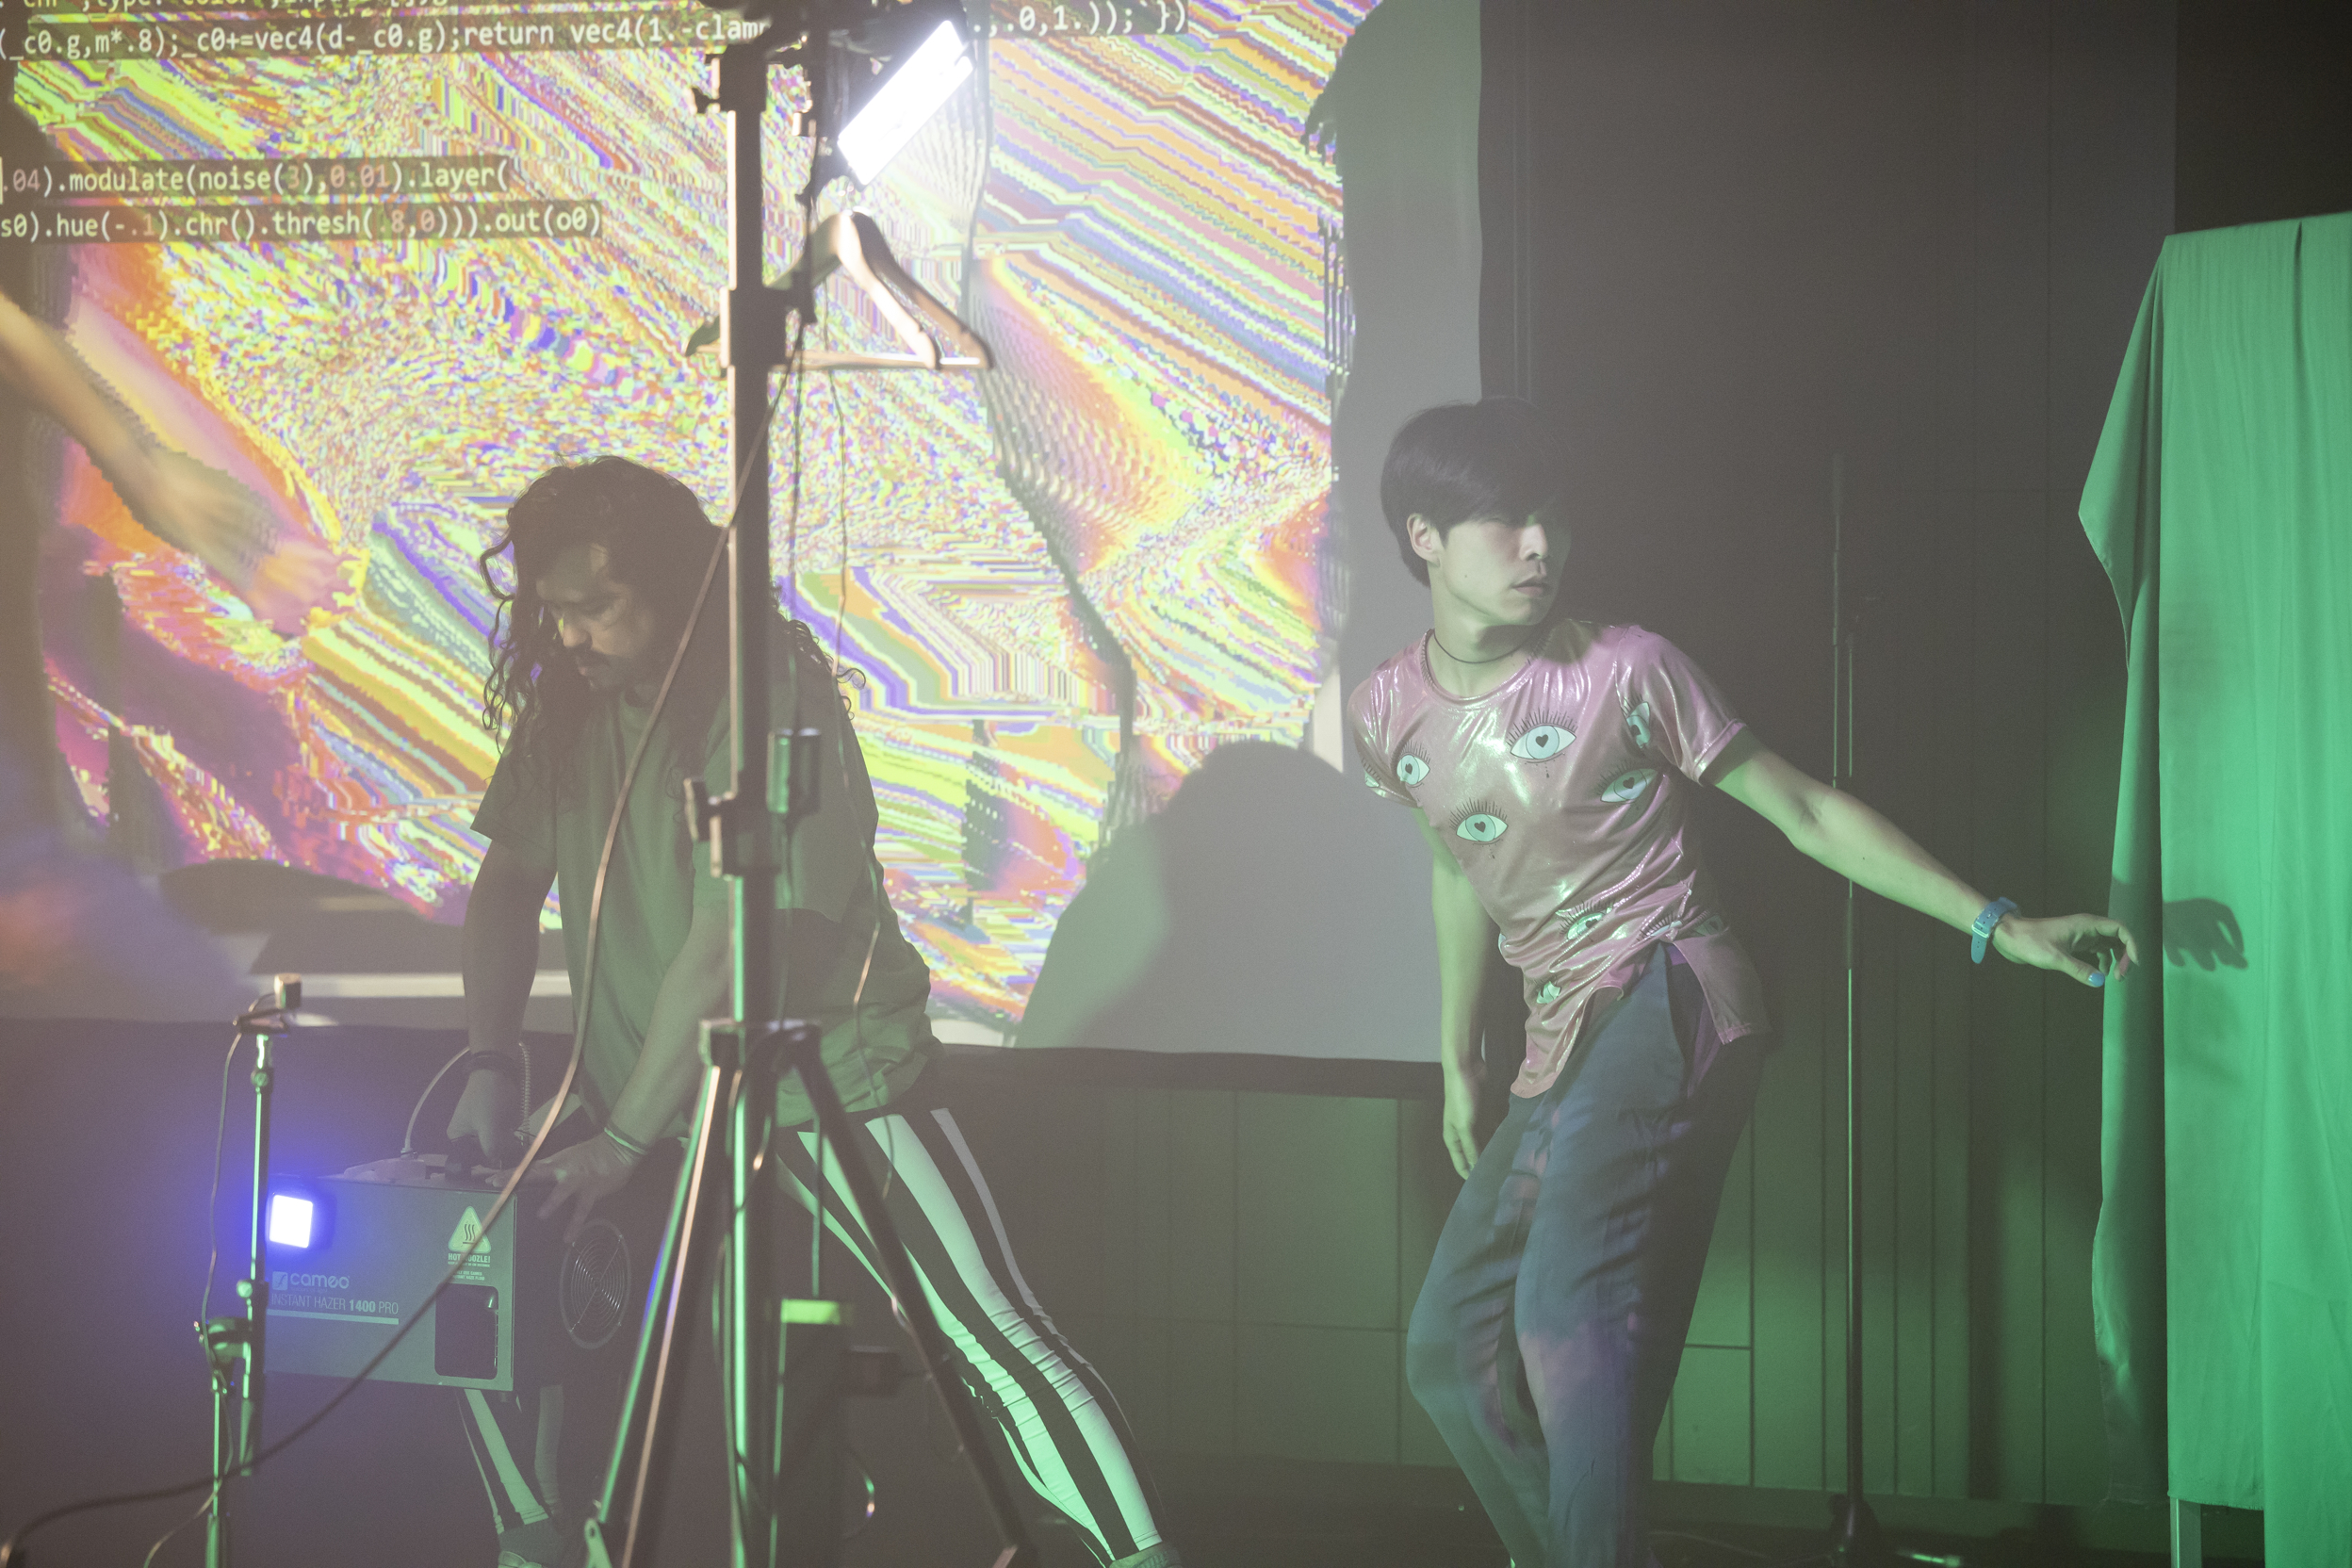 Two performers on stage facing away from each other, one holding a cubic machine and standing in front of glitchy projection